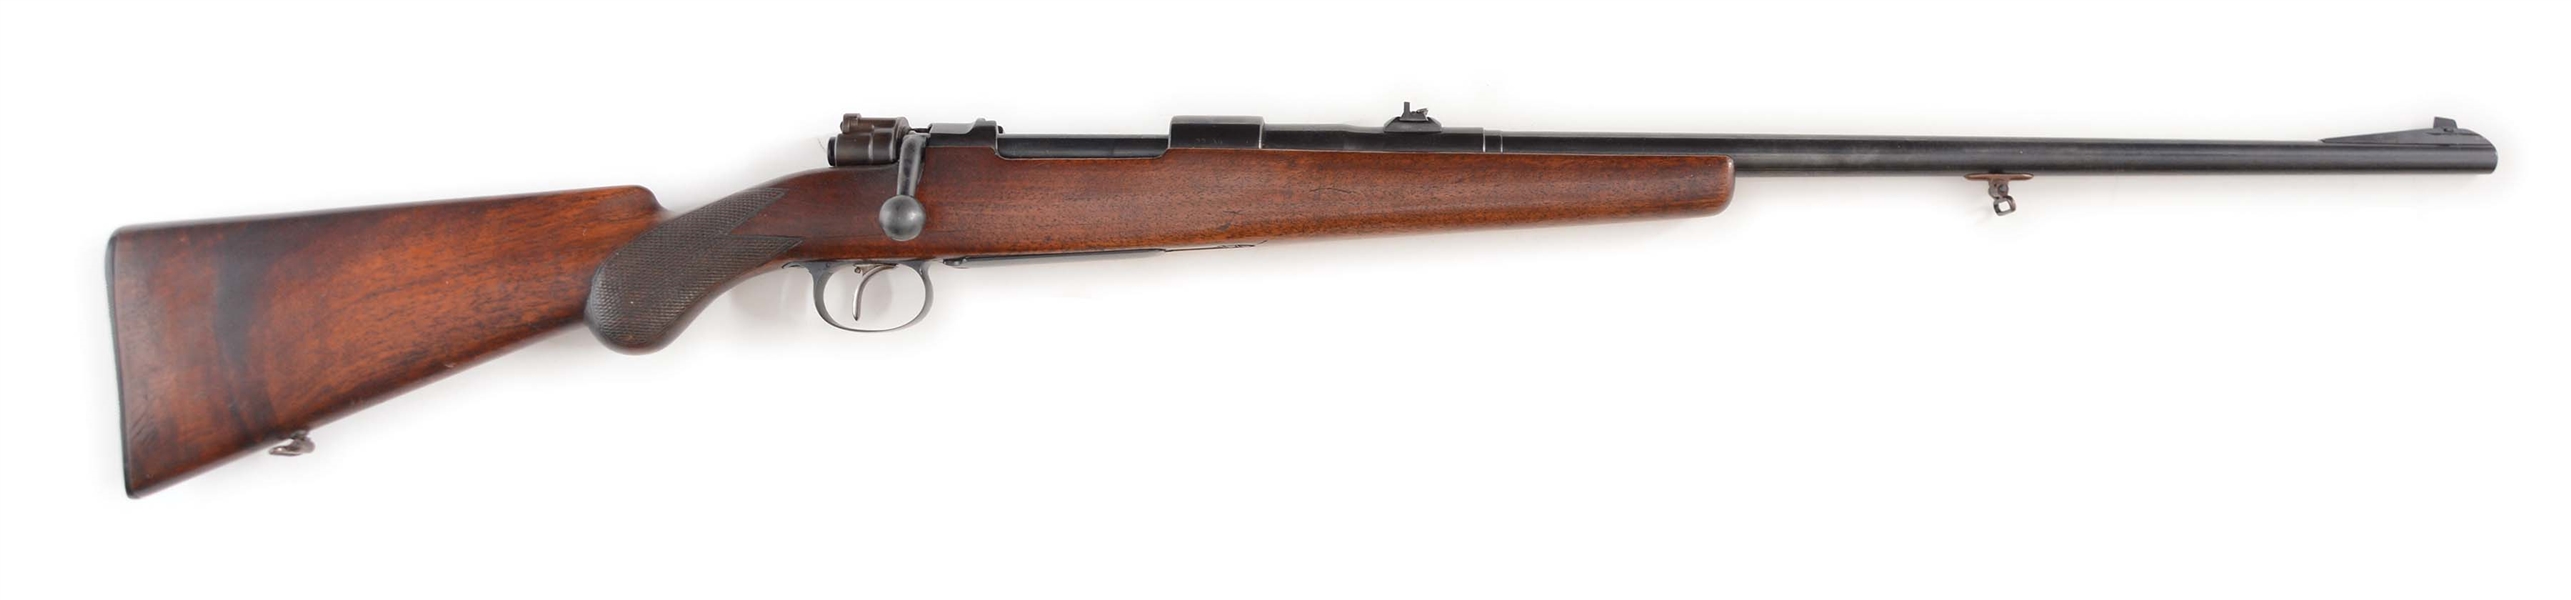 (C) FN MAUSER 98 BOLT ACTION SPORTING RIFLE.